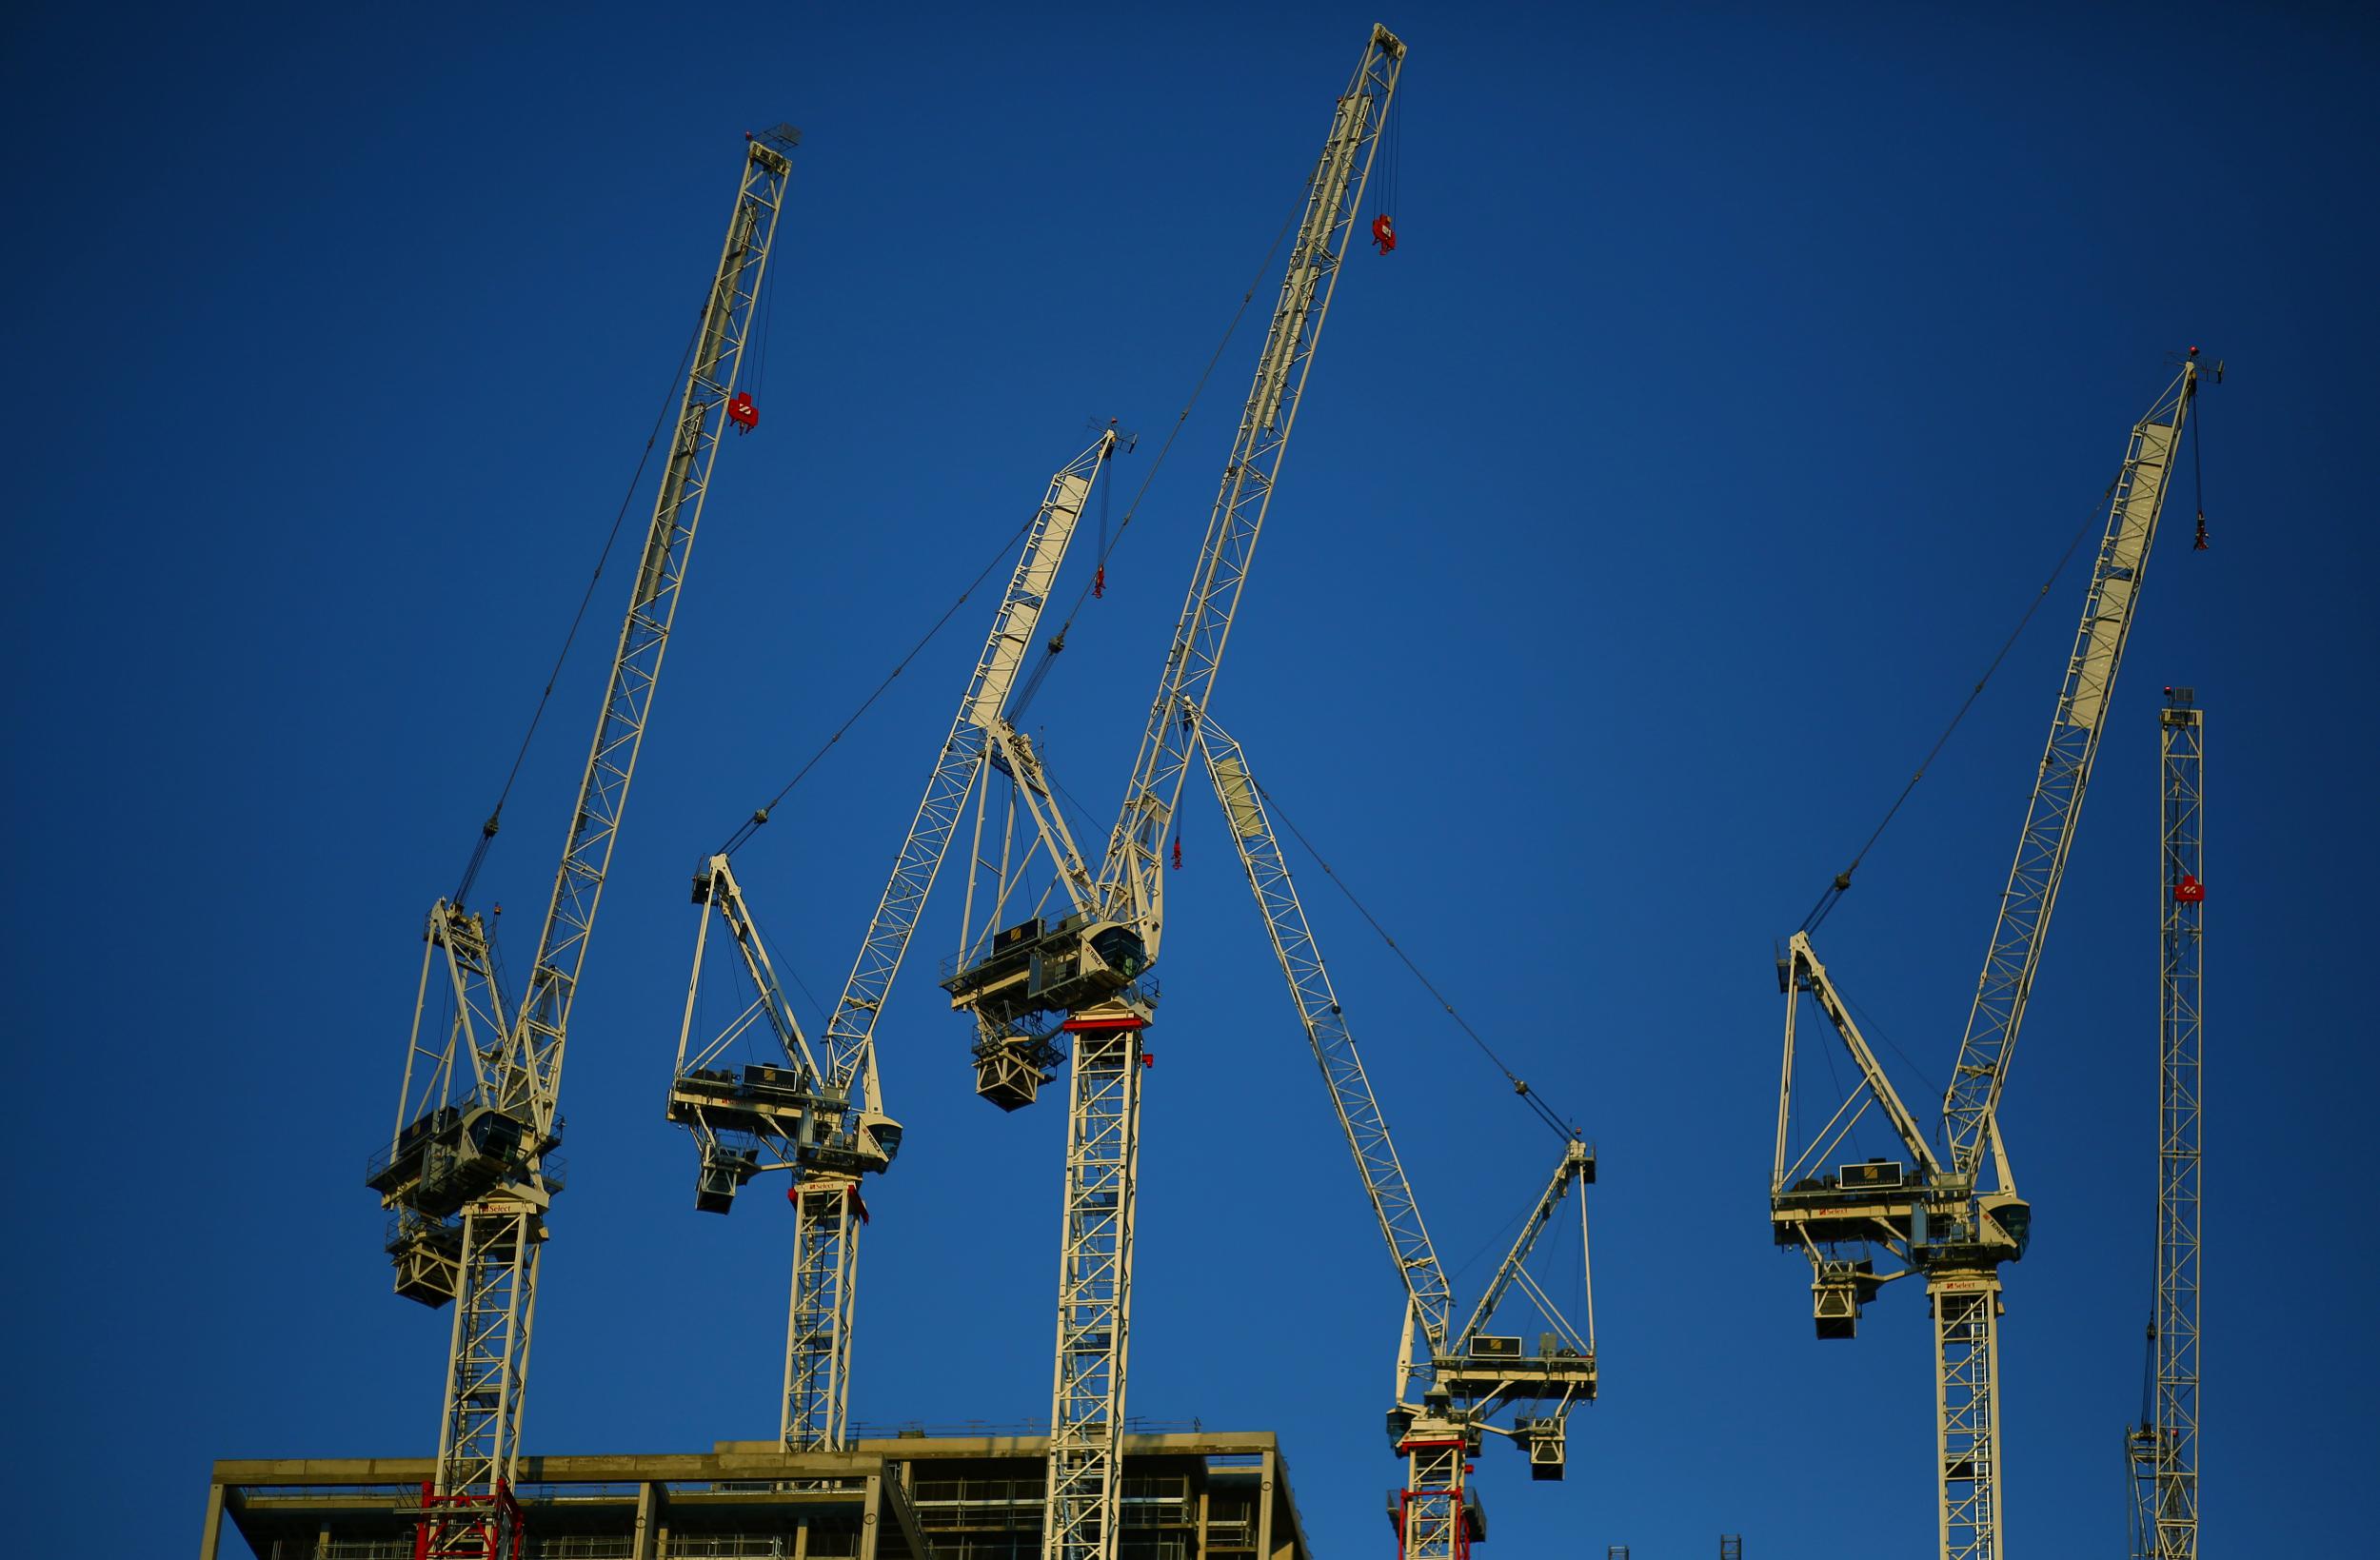 Confidence among construction managers was the lowest since early 2013 according to the PMI survey